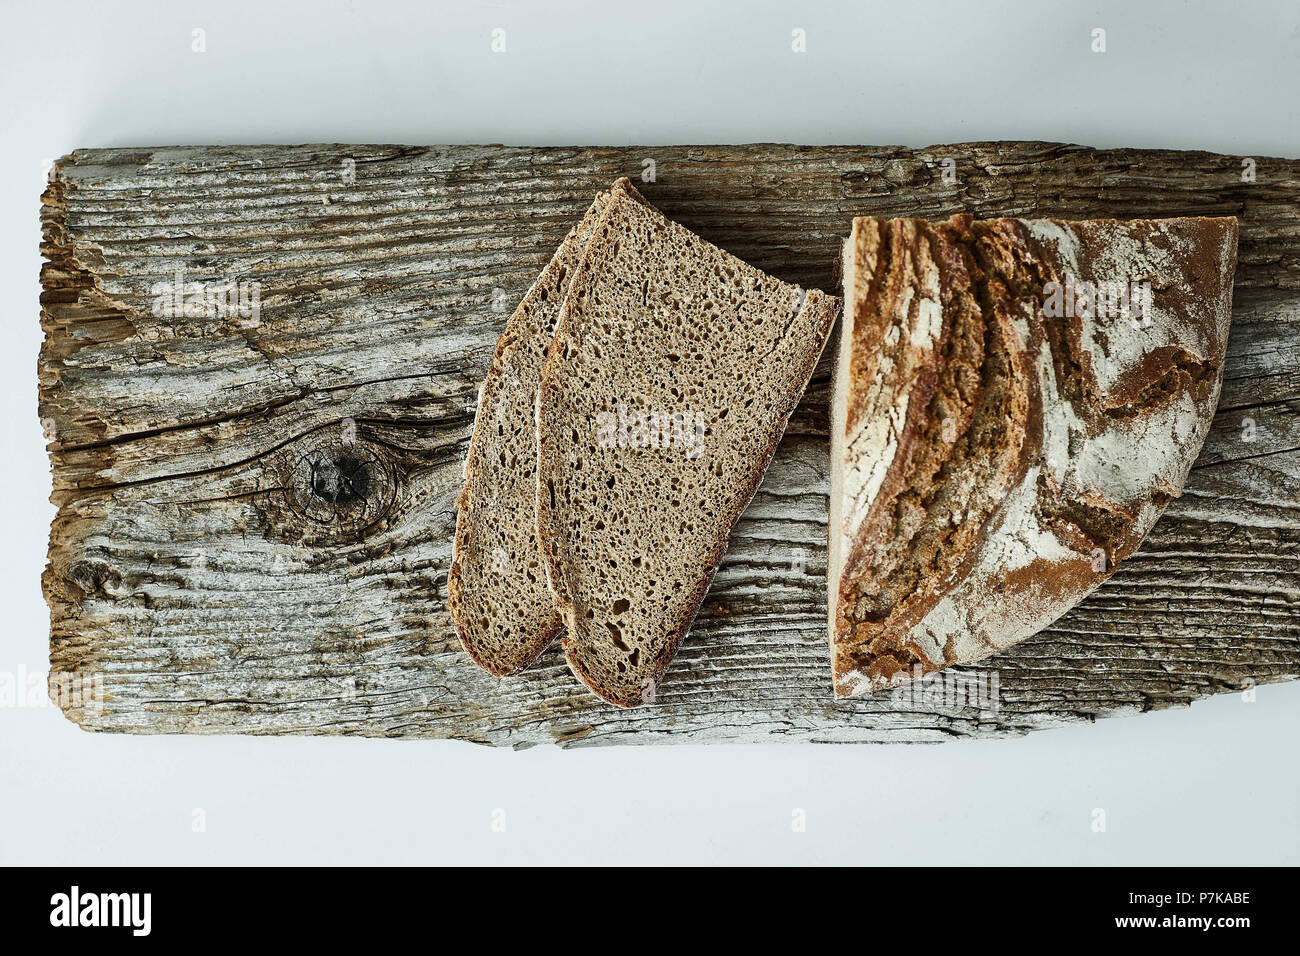 Bread on wooden board, perspective from above Stock Photo